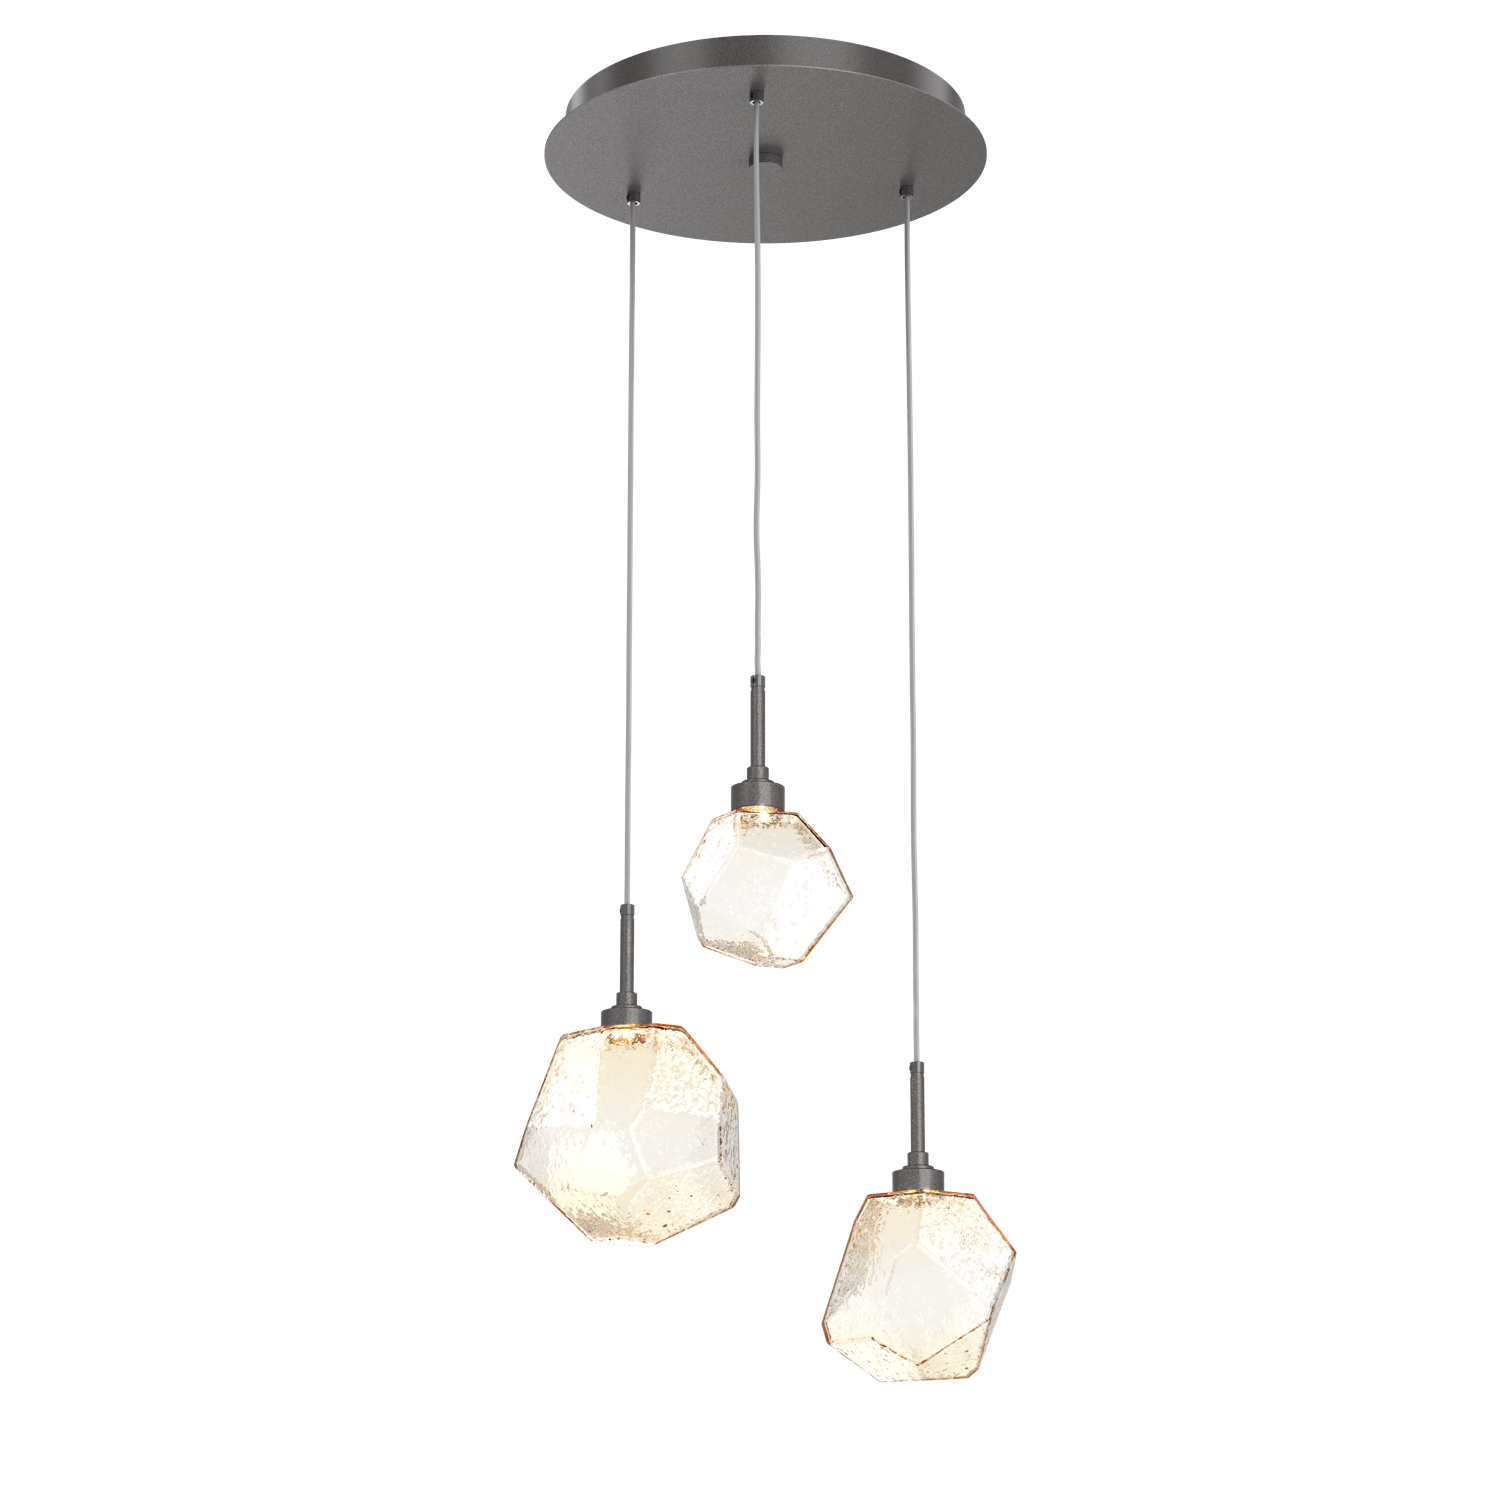 CHB0039-03-GP-A-Hammerton-Studio-Gem-3-light-round-pendant-chandelier-with-graphite-finish-and-amber-blown-glass-shades-and-LED-lamping